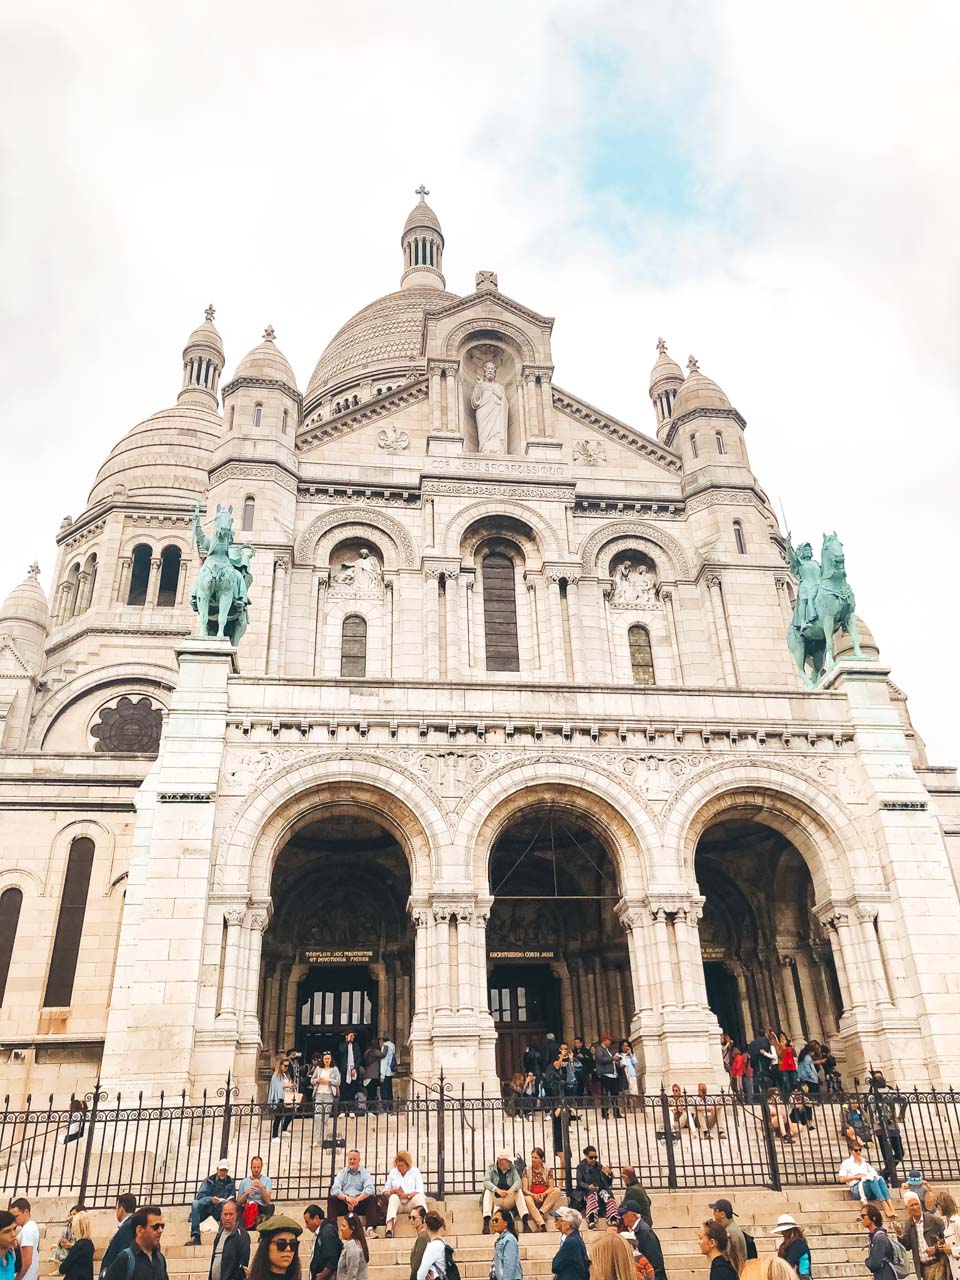 Crowds of tourists on the stairs leading to the Sacré-Cœur basilica in Paris, France